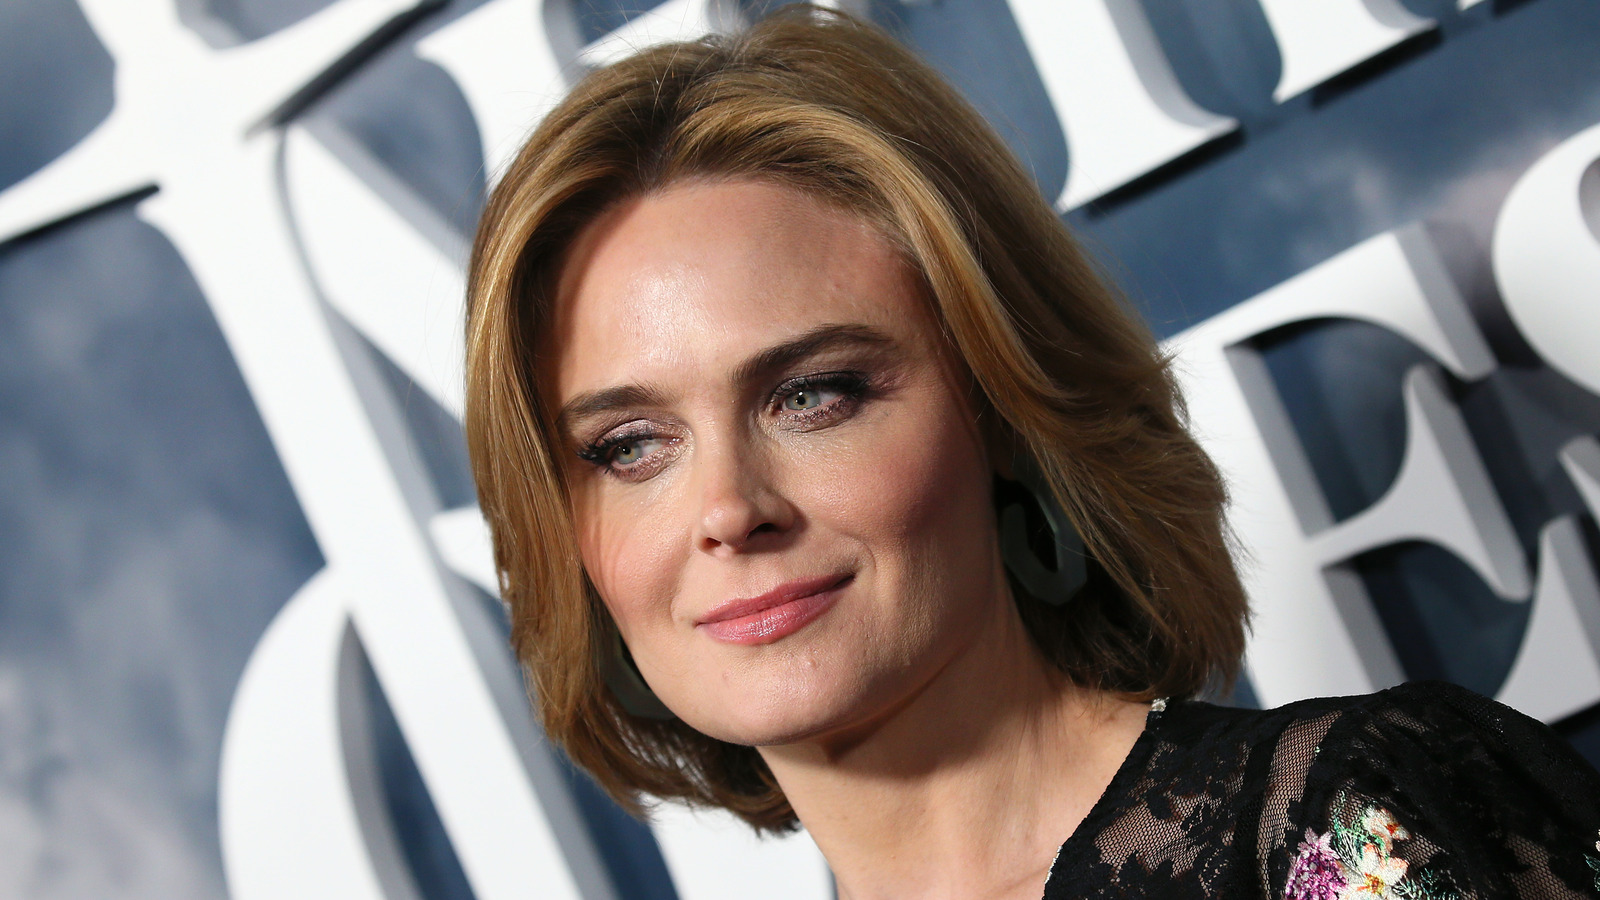 How Many Kids Does Emily Deschanel Have?